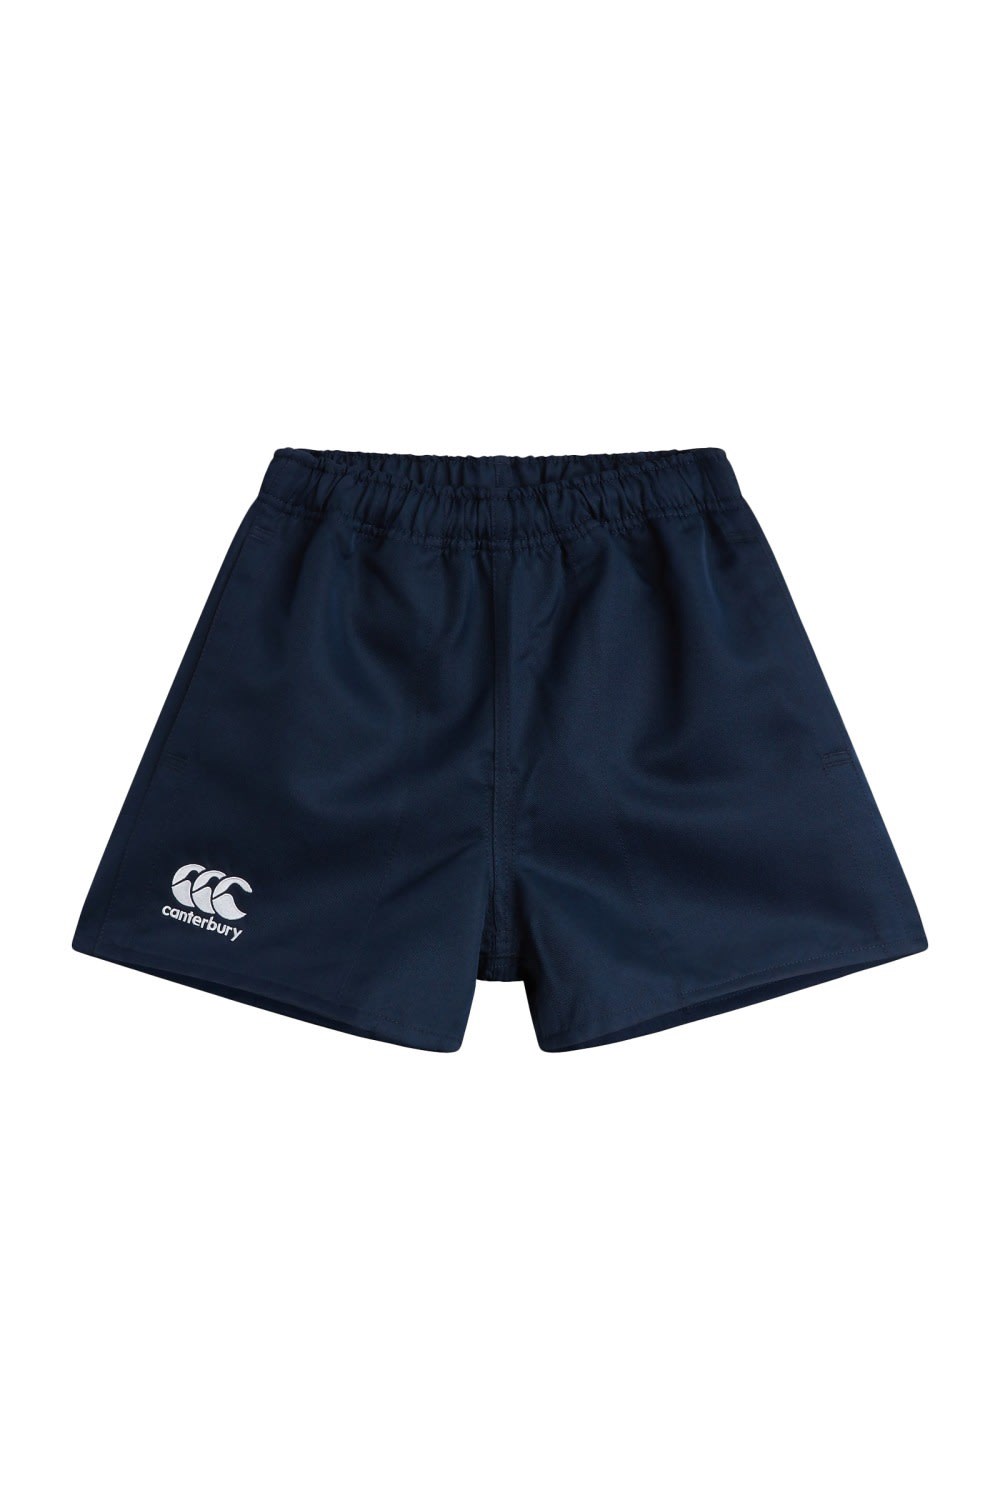 Kids Professional Rugby Shorts -